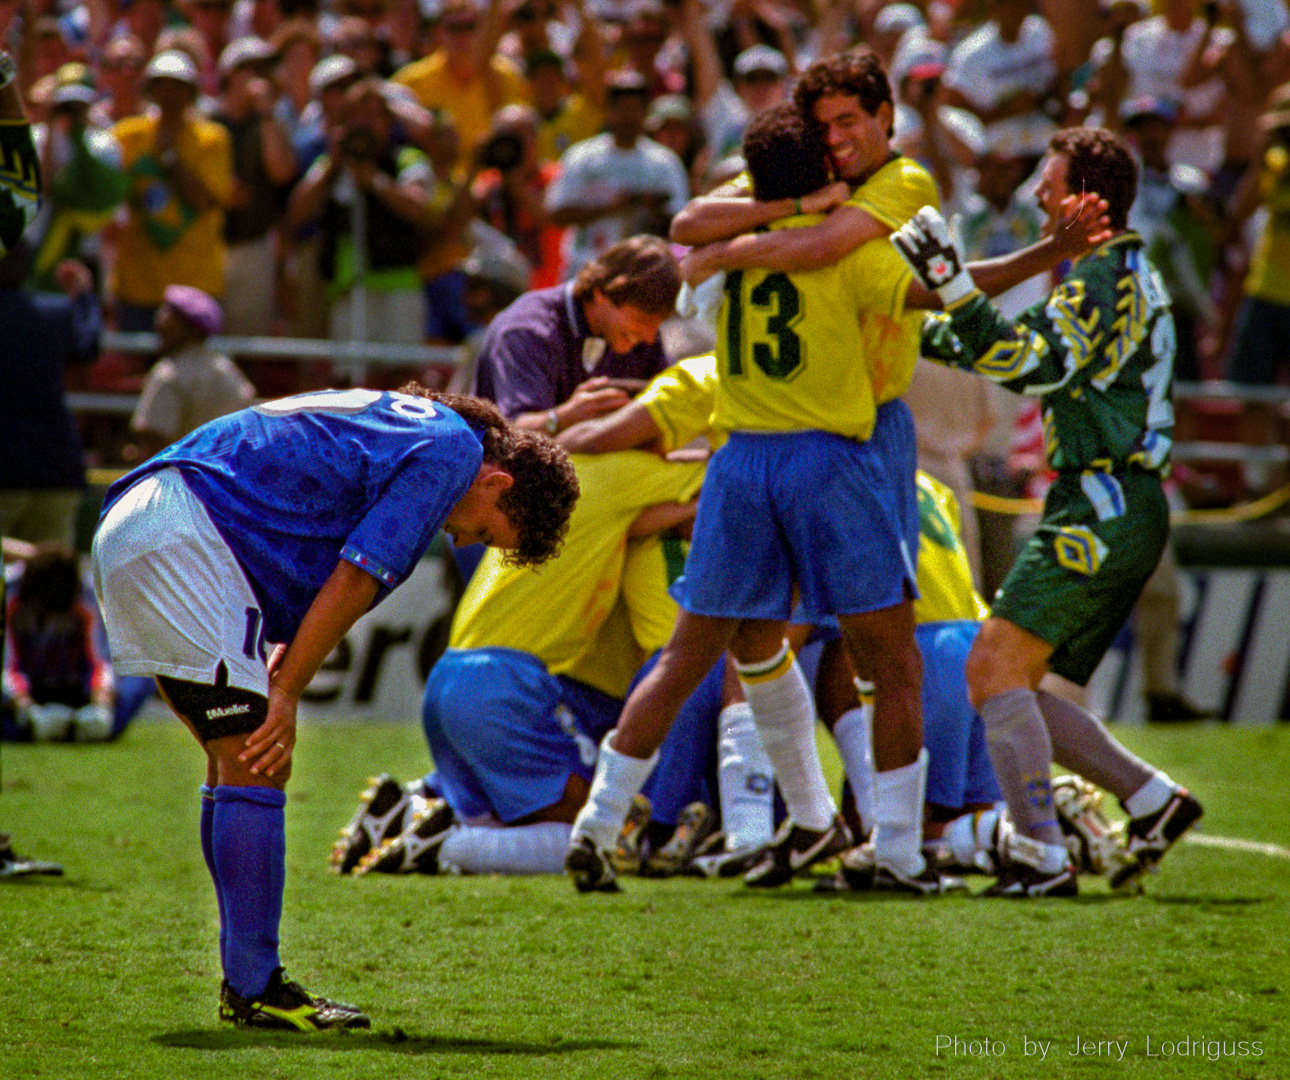 Italy's Roberto Baggio hangs his head as Brazil celebrates their 1994 World Cup Soccer championship in the background after Baggio missed Italy's final penalty kick. The two teams had played two scoreless periods as well as two scoreless overtimes, and the title game came down to penalty kicks for the first time ever, which Brazil won 3-2 when Baggio's shot sailed over the top bar of the goal. The game was played July 17, 1994 in front of 94,194 fans in the Rose Bowl in California and billions around the world. It was Brazil's fourth World Cup title.